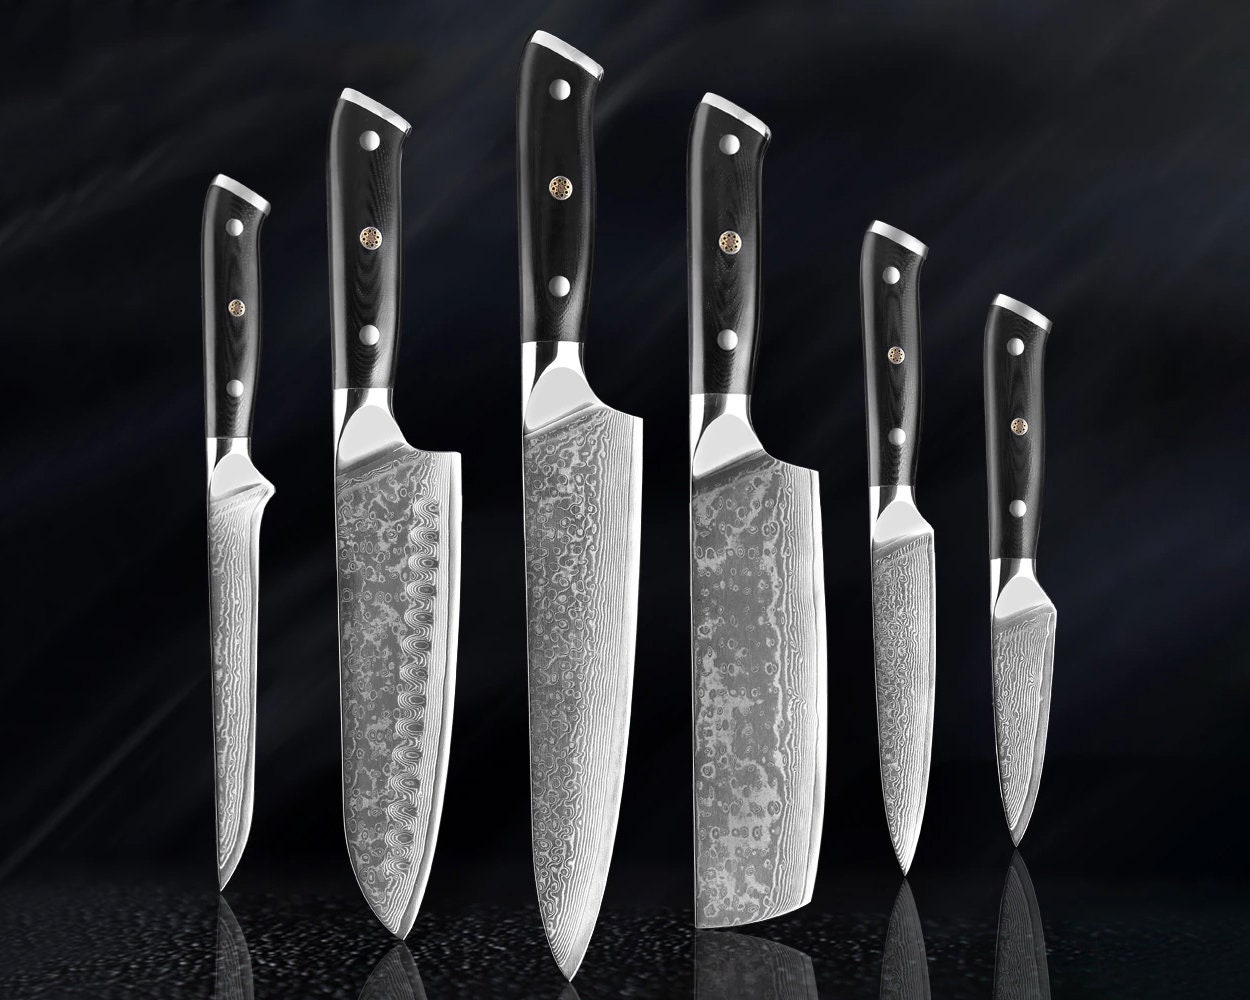 10pcs Kitchen Knives Set ,Stainless Steel Chef Knife Set,Japanese Damascus Style,Black, Size: 9.1 in, Gray